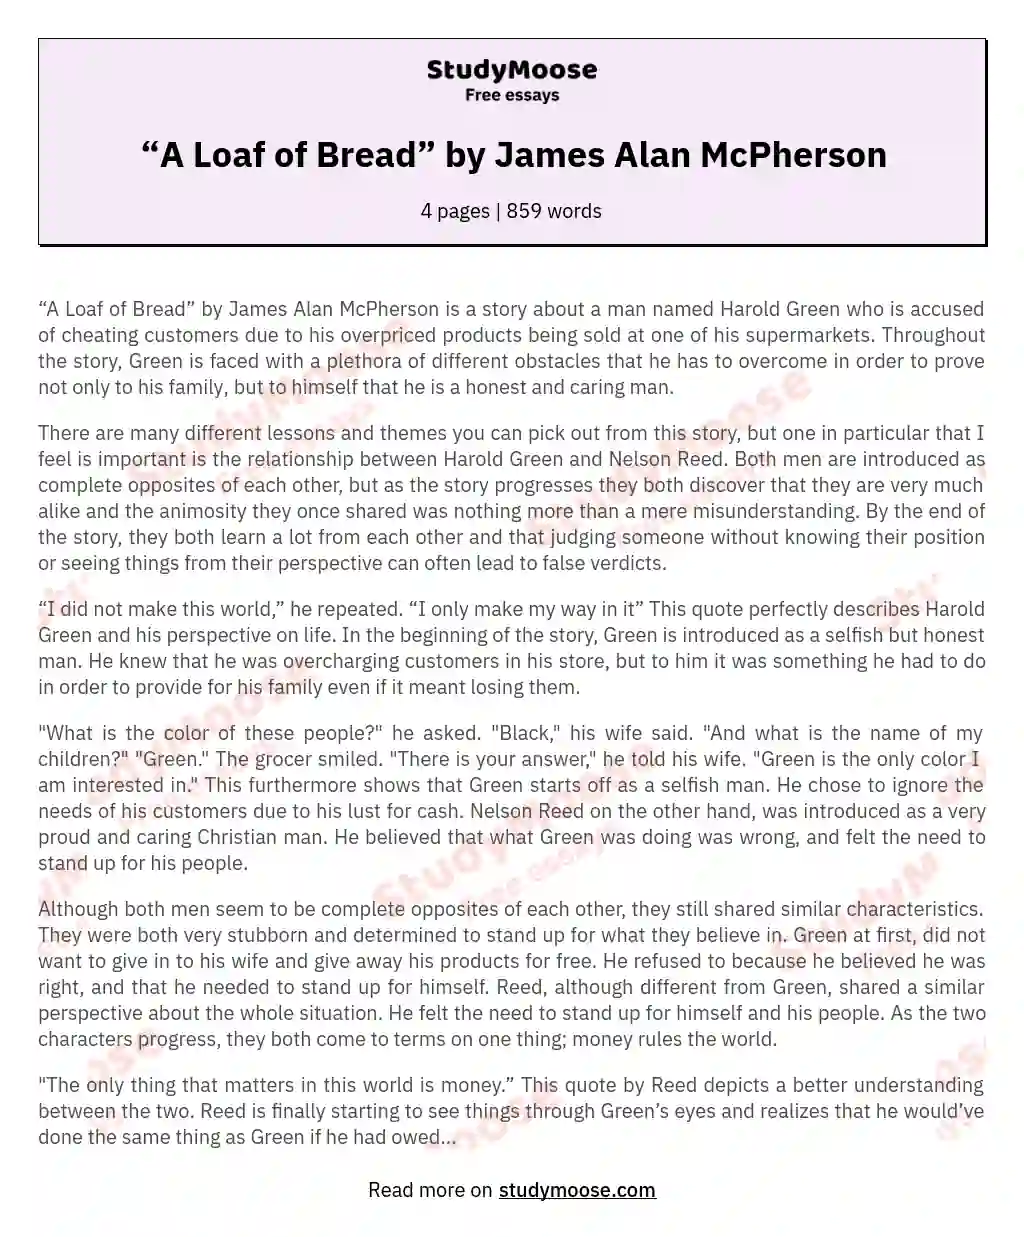 “A Loaf of Bread” by James Alan McPherson